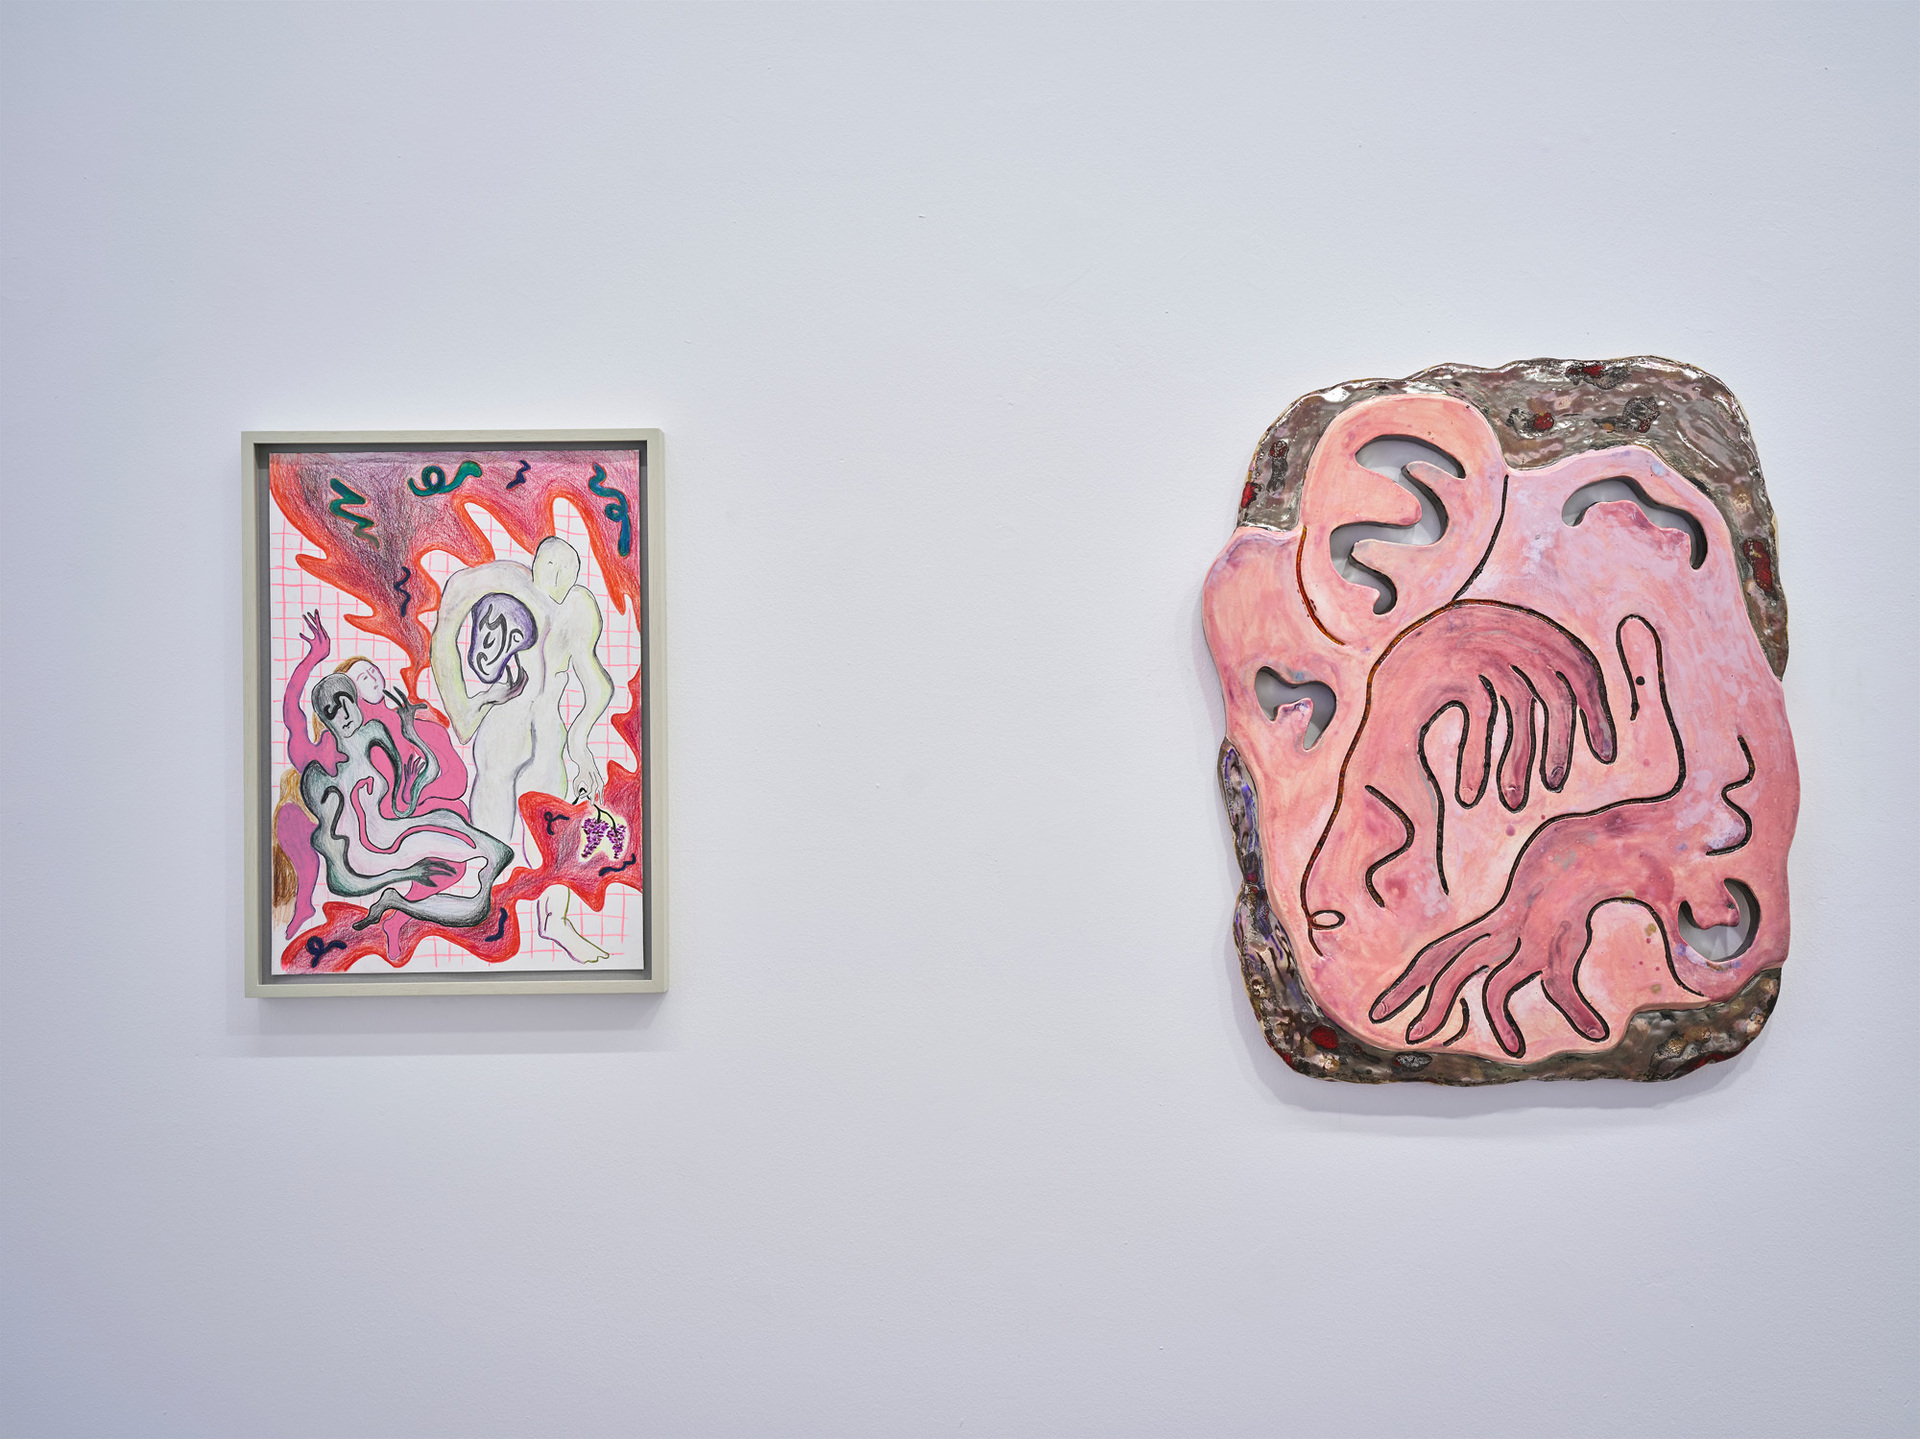 Left: Monika Grabuschnigg, Drifting into exactitude, such soonspeeding gear, 2019. Mixed media on paper, 42 x 30 cm. Right: Monika Grabuschnigg, I have a lot of thoughts on this but it exceeds my 128 gb, 2019. Glazed earthenware and resin. 58 x 46 x 2.5 cm